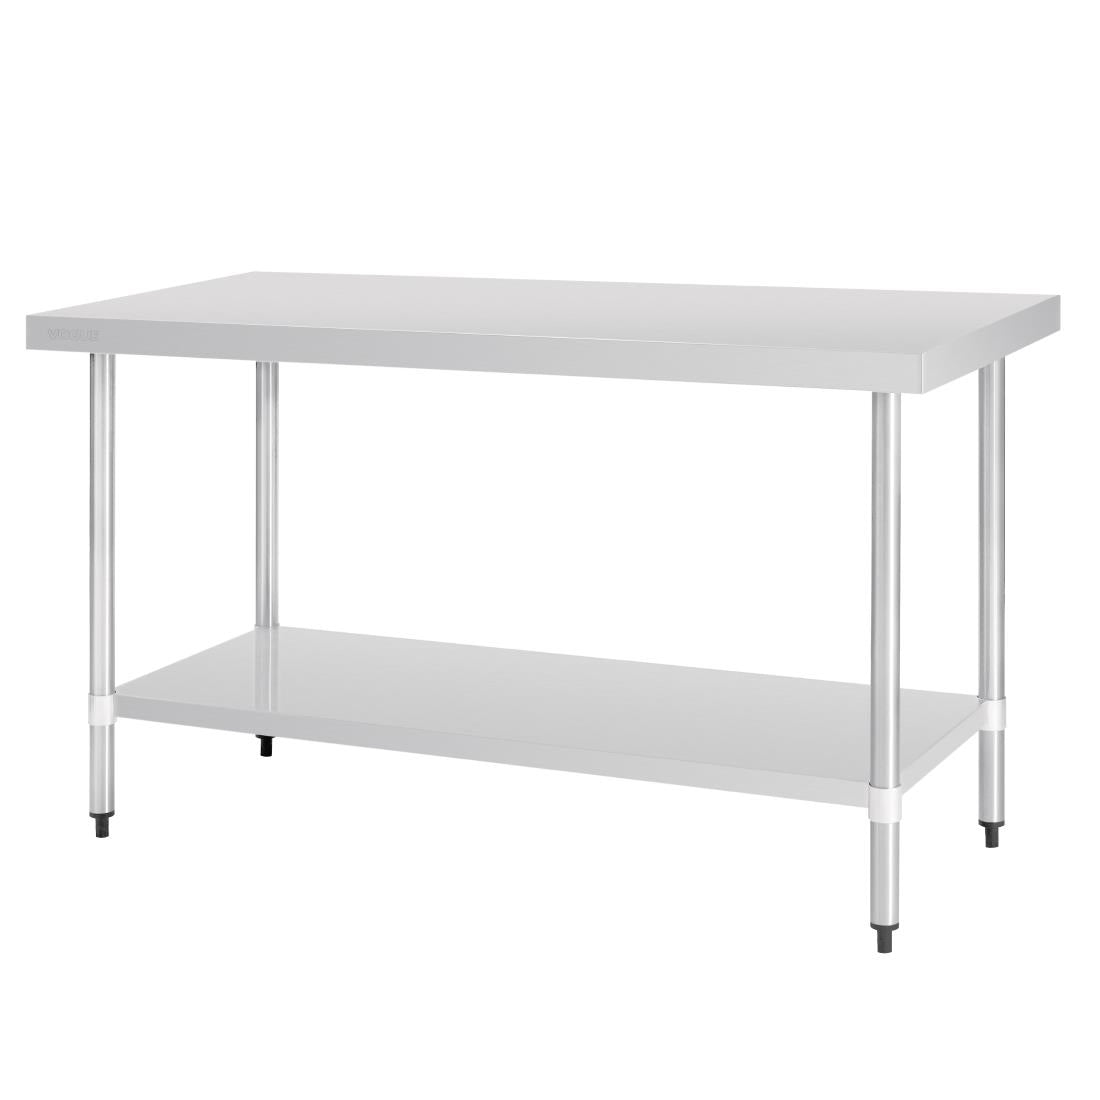 GJ503 Vogue Stainless Steel Prep Table 1500mm JD Catering Equipment Solutions Ltd